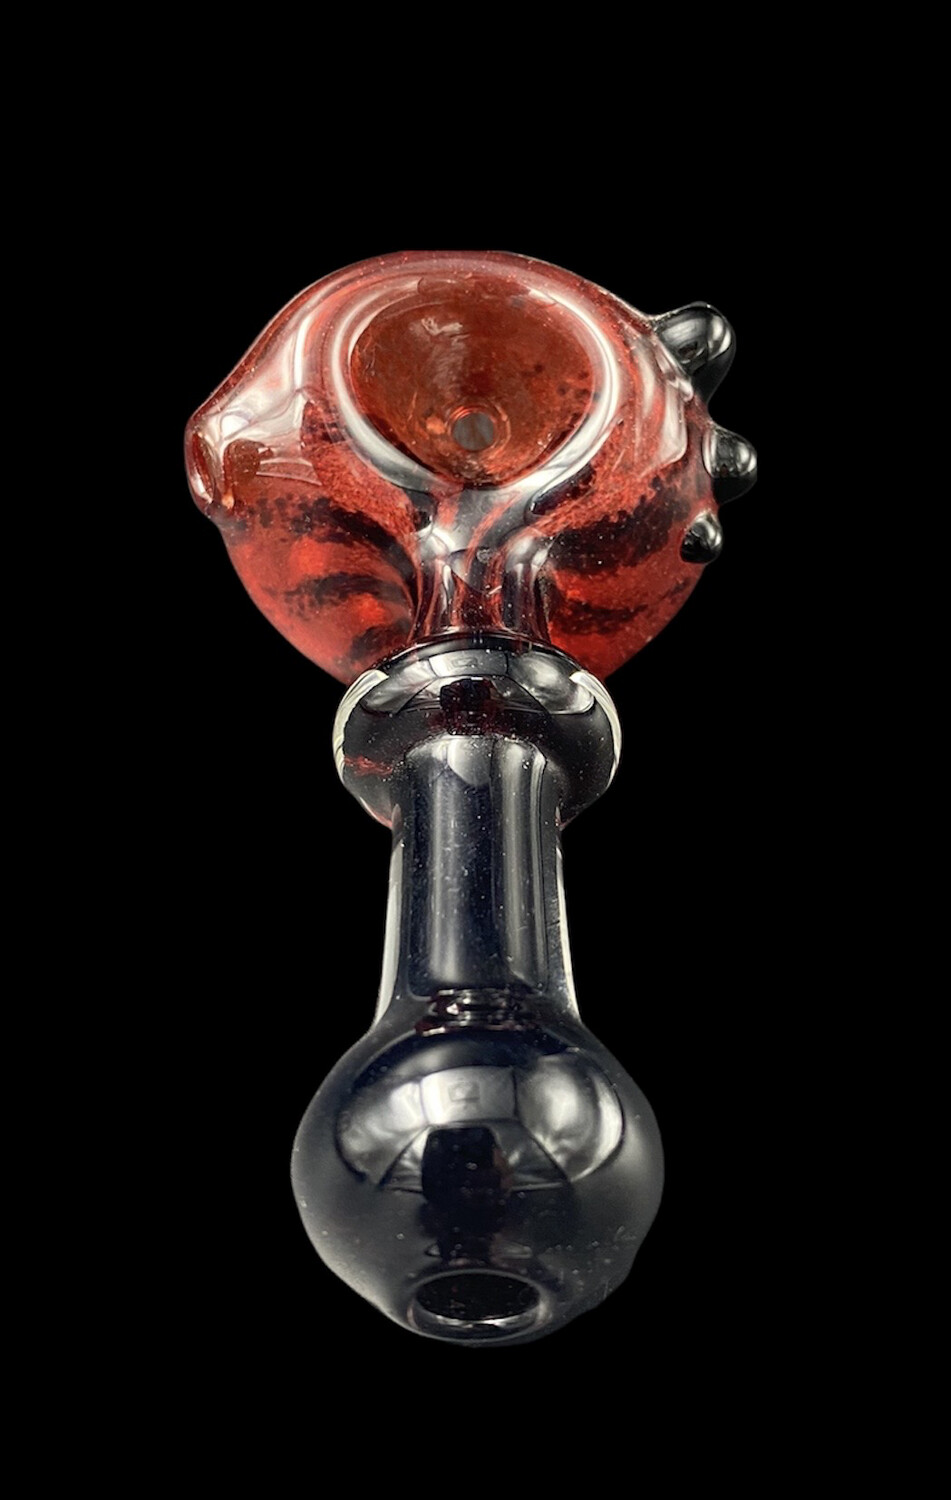 Goblin King (TX) Frit Spoon - Black to Red